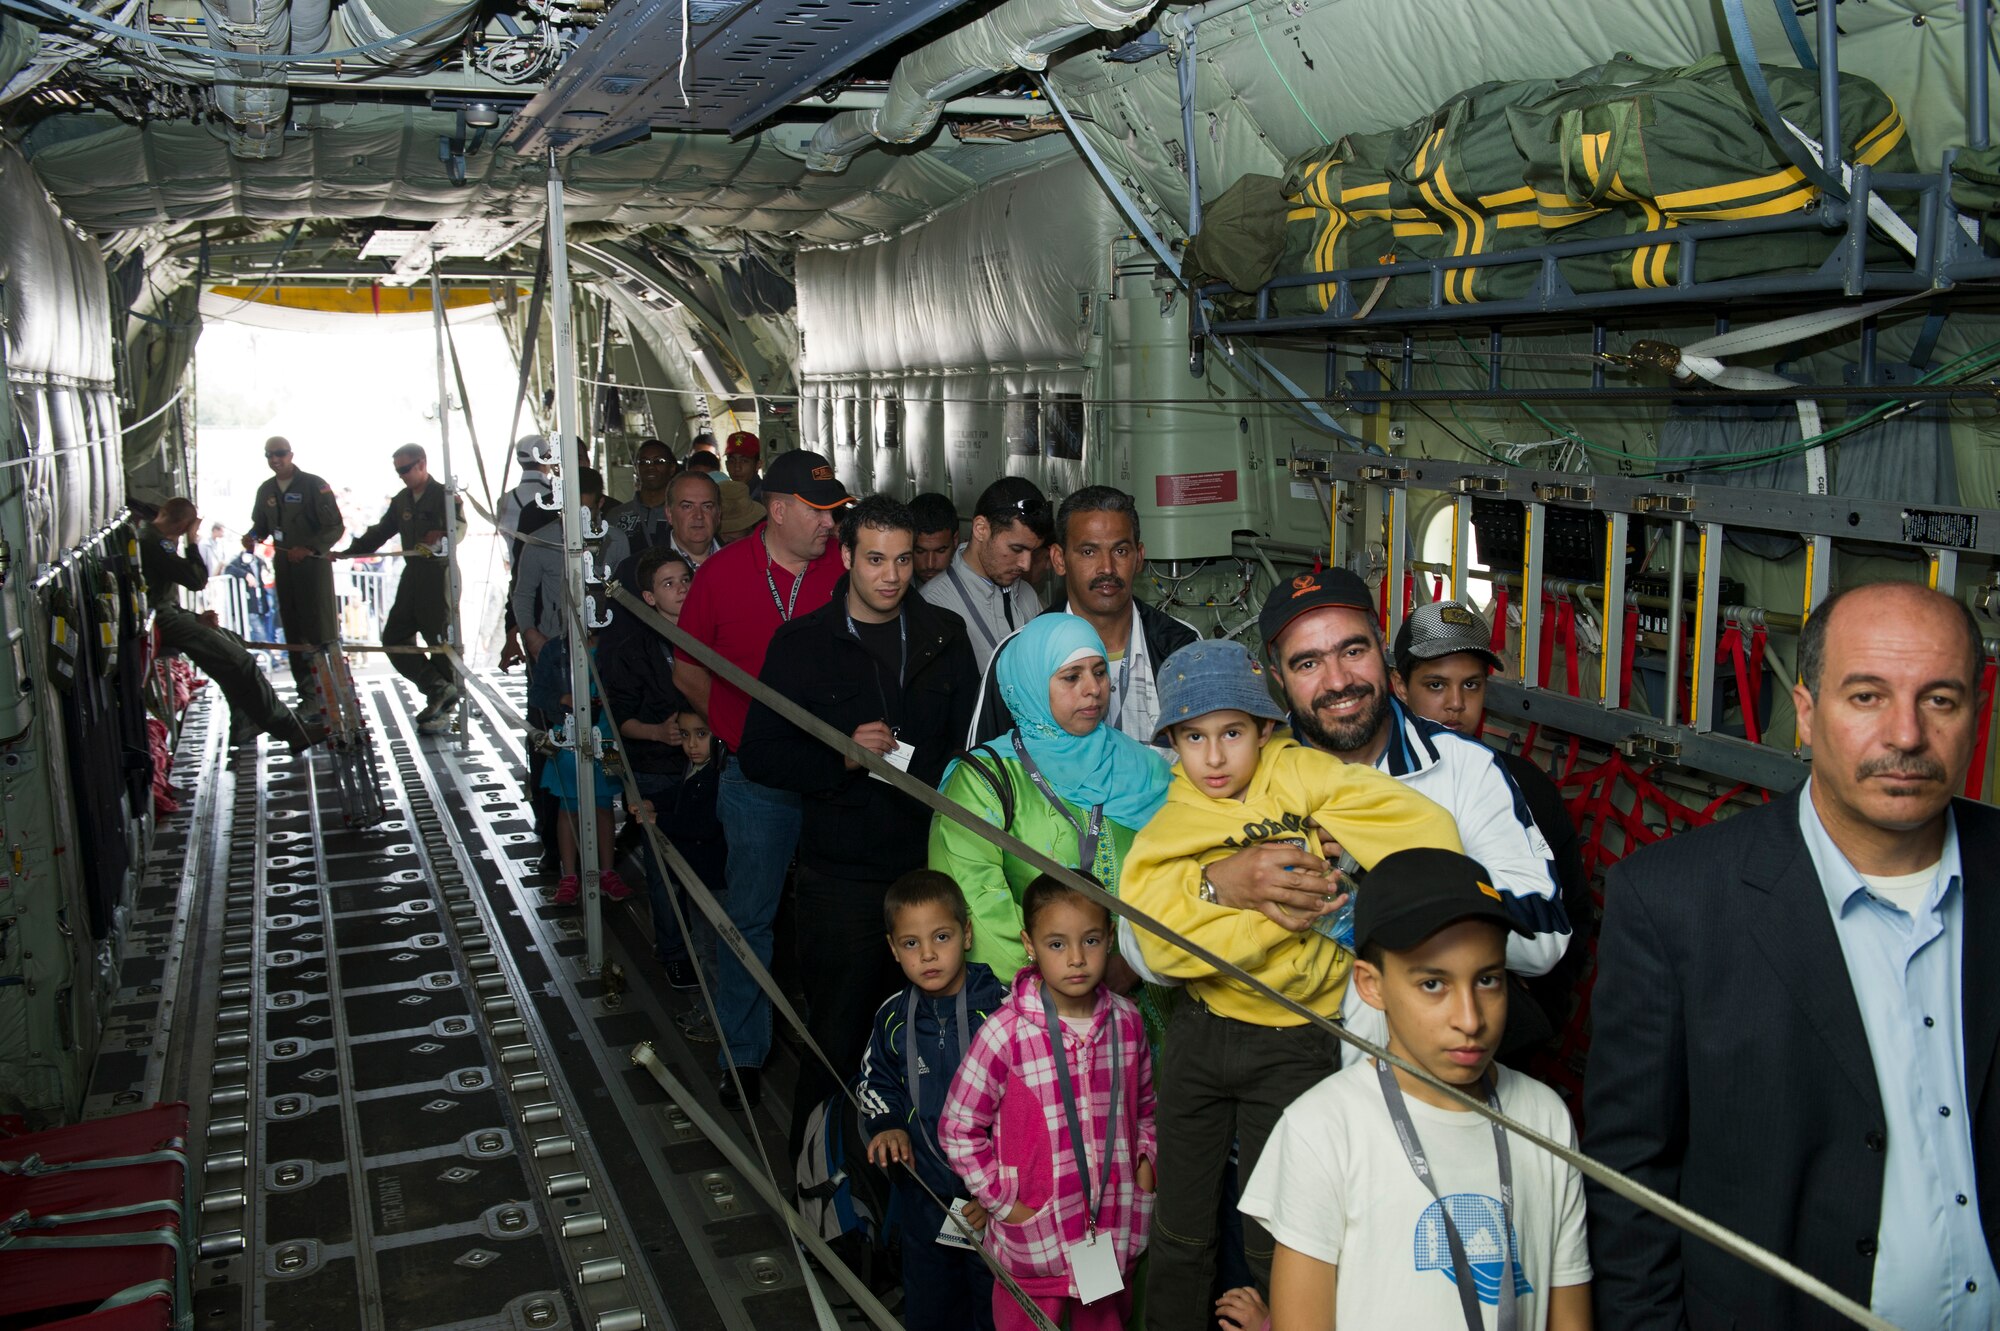 MARRAKECH, Morocco -- A crowd of people tour the inside of a U.S. Air Force C-130J Super Hercules at Aero Expo Marrakech 2012 April 7, 2012. U.S. Air Forces Africa participated in the third biennial Aeroexpo Marrakech to strengthen the partnerships with the nations involved and show commitment to security and stability in the region. (U.S. Air Force photo/Staff Sgt. Benjamin Wilson)